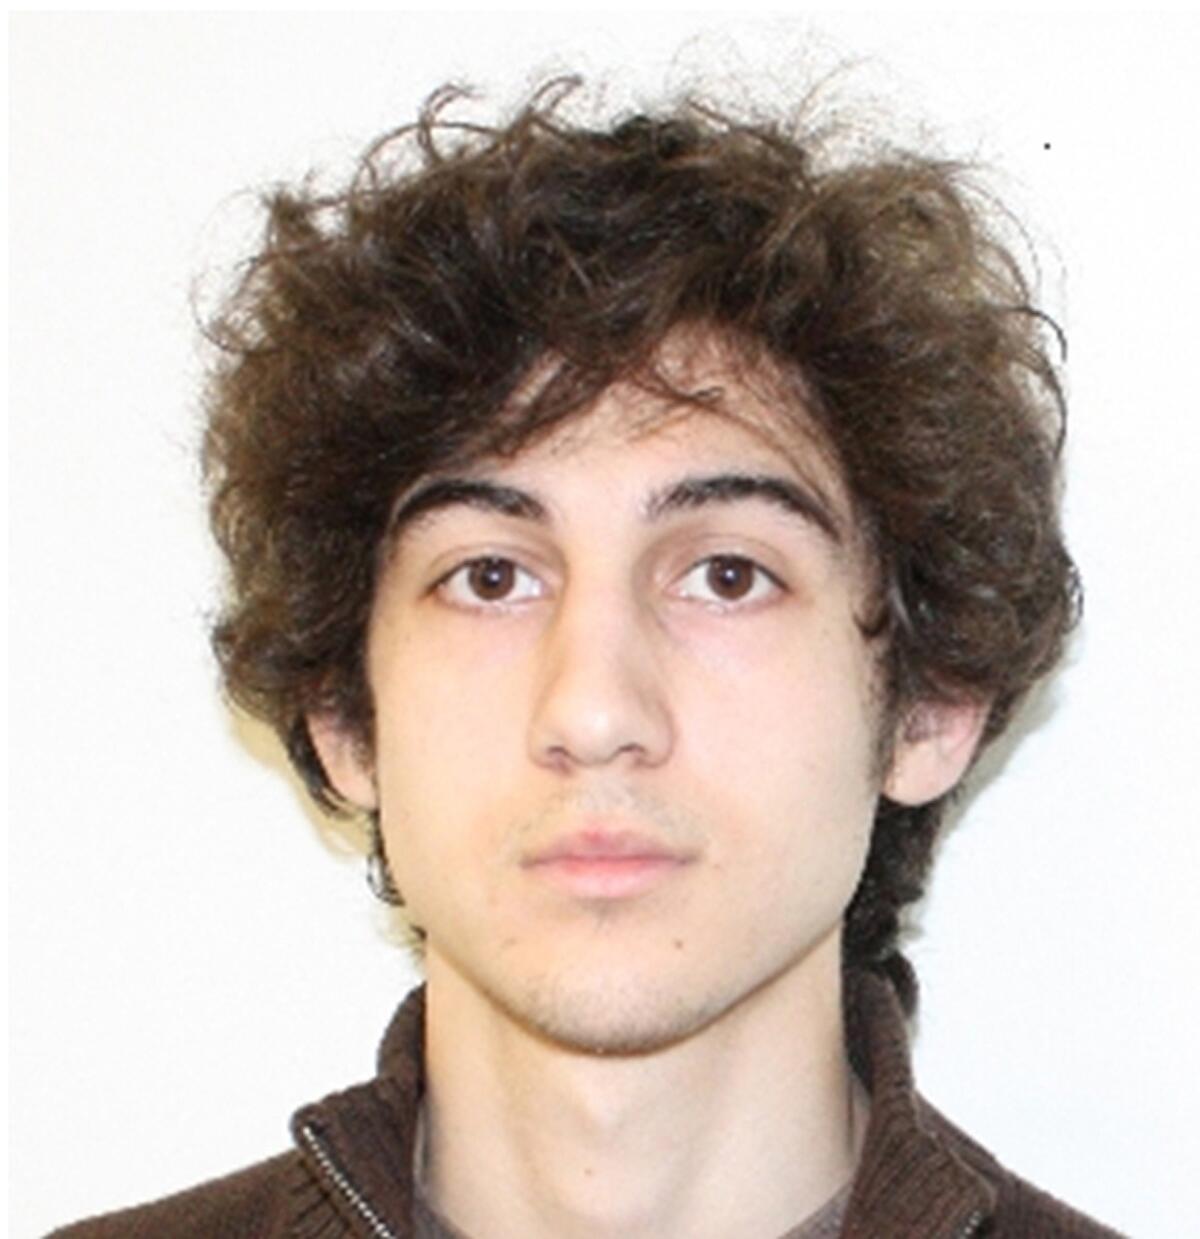 Dzhokhar Tsarnaev faces 30 federal charges in connection with the 2013 Boston Marathon bombings, more than half of which carry the death penalty.